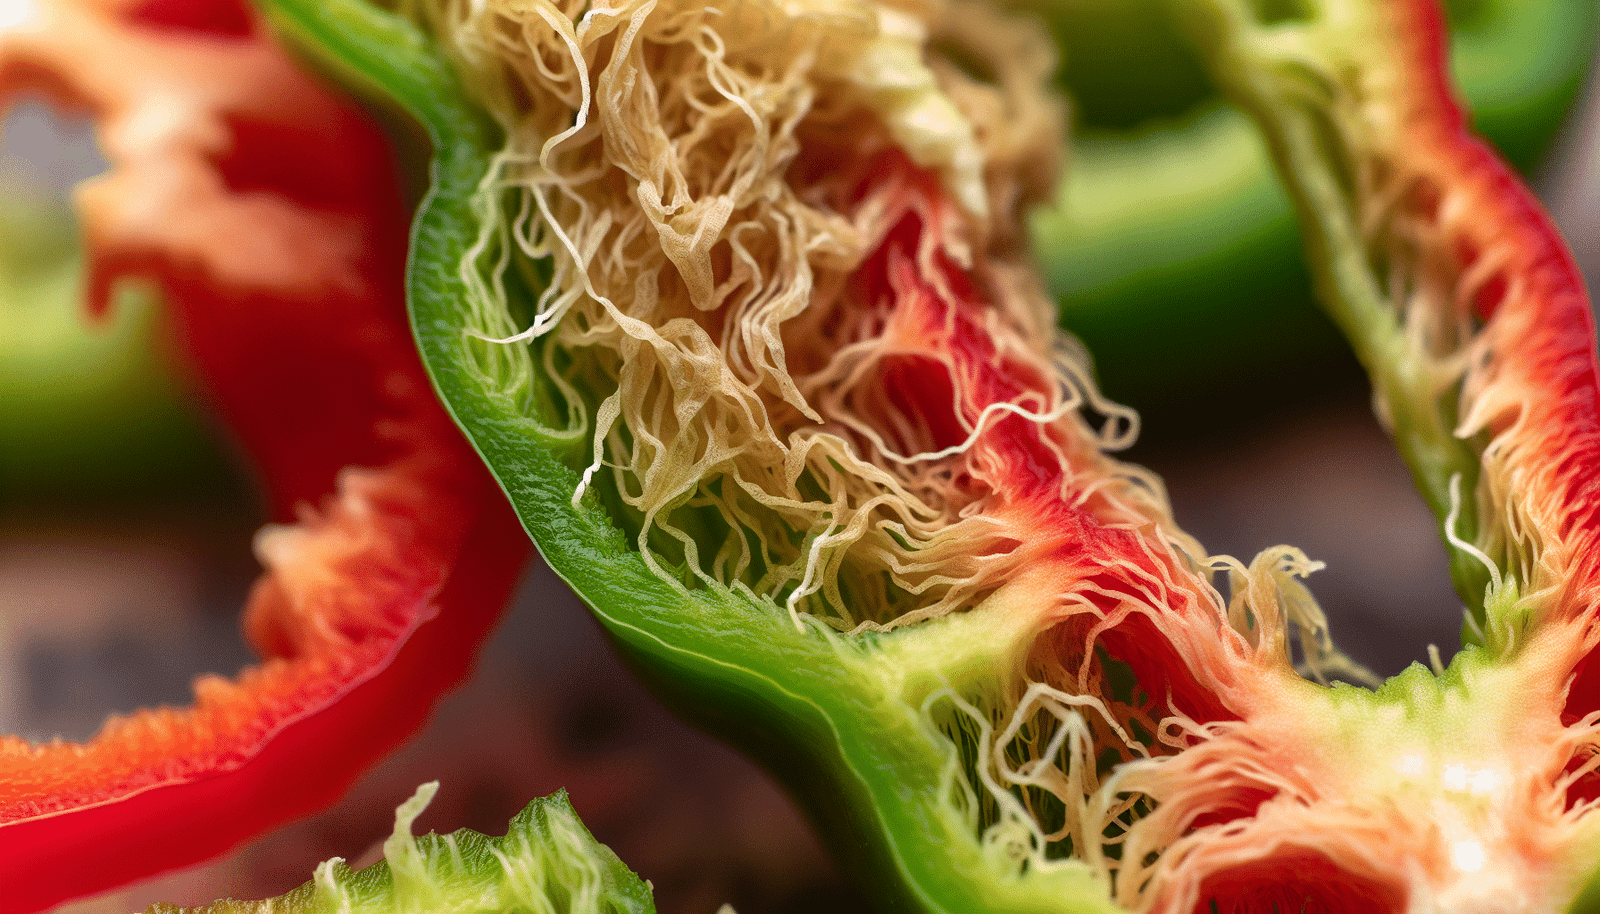 A close-up image of fibrous bell pepper slices